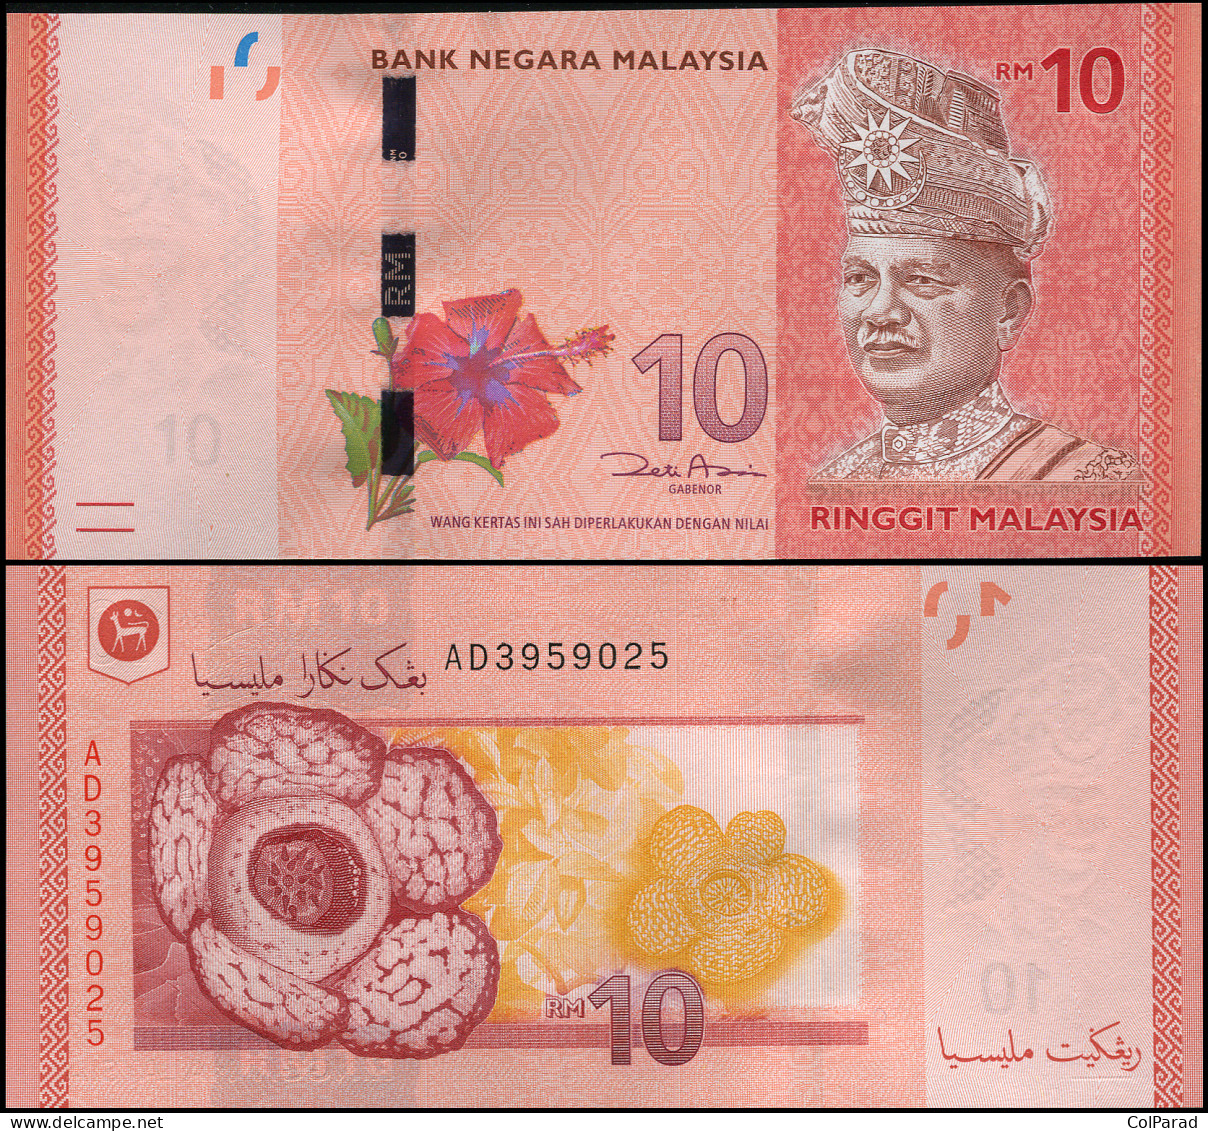 MALAYSIA 10 RINGGIT - ND (2012) - Paper Unc - P.53a Banknote - Maleisië